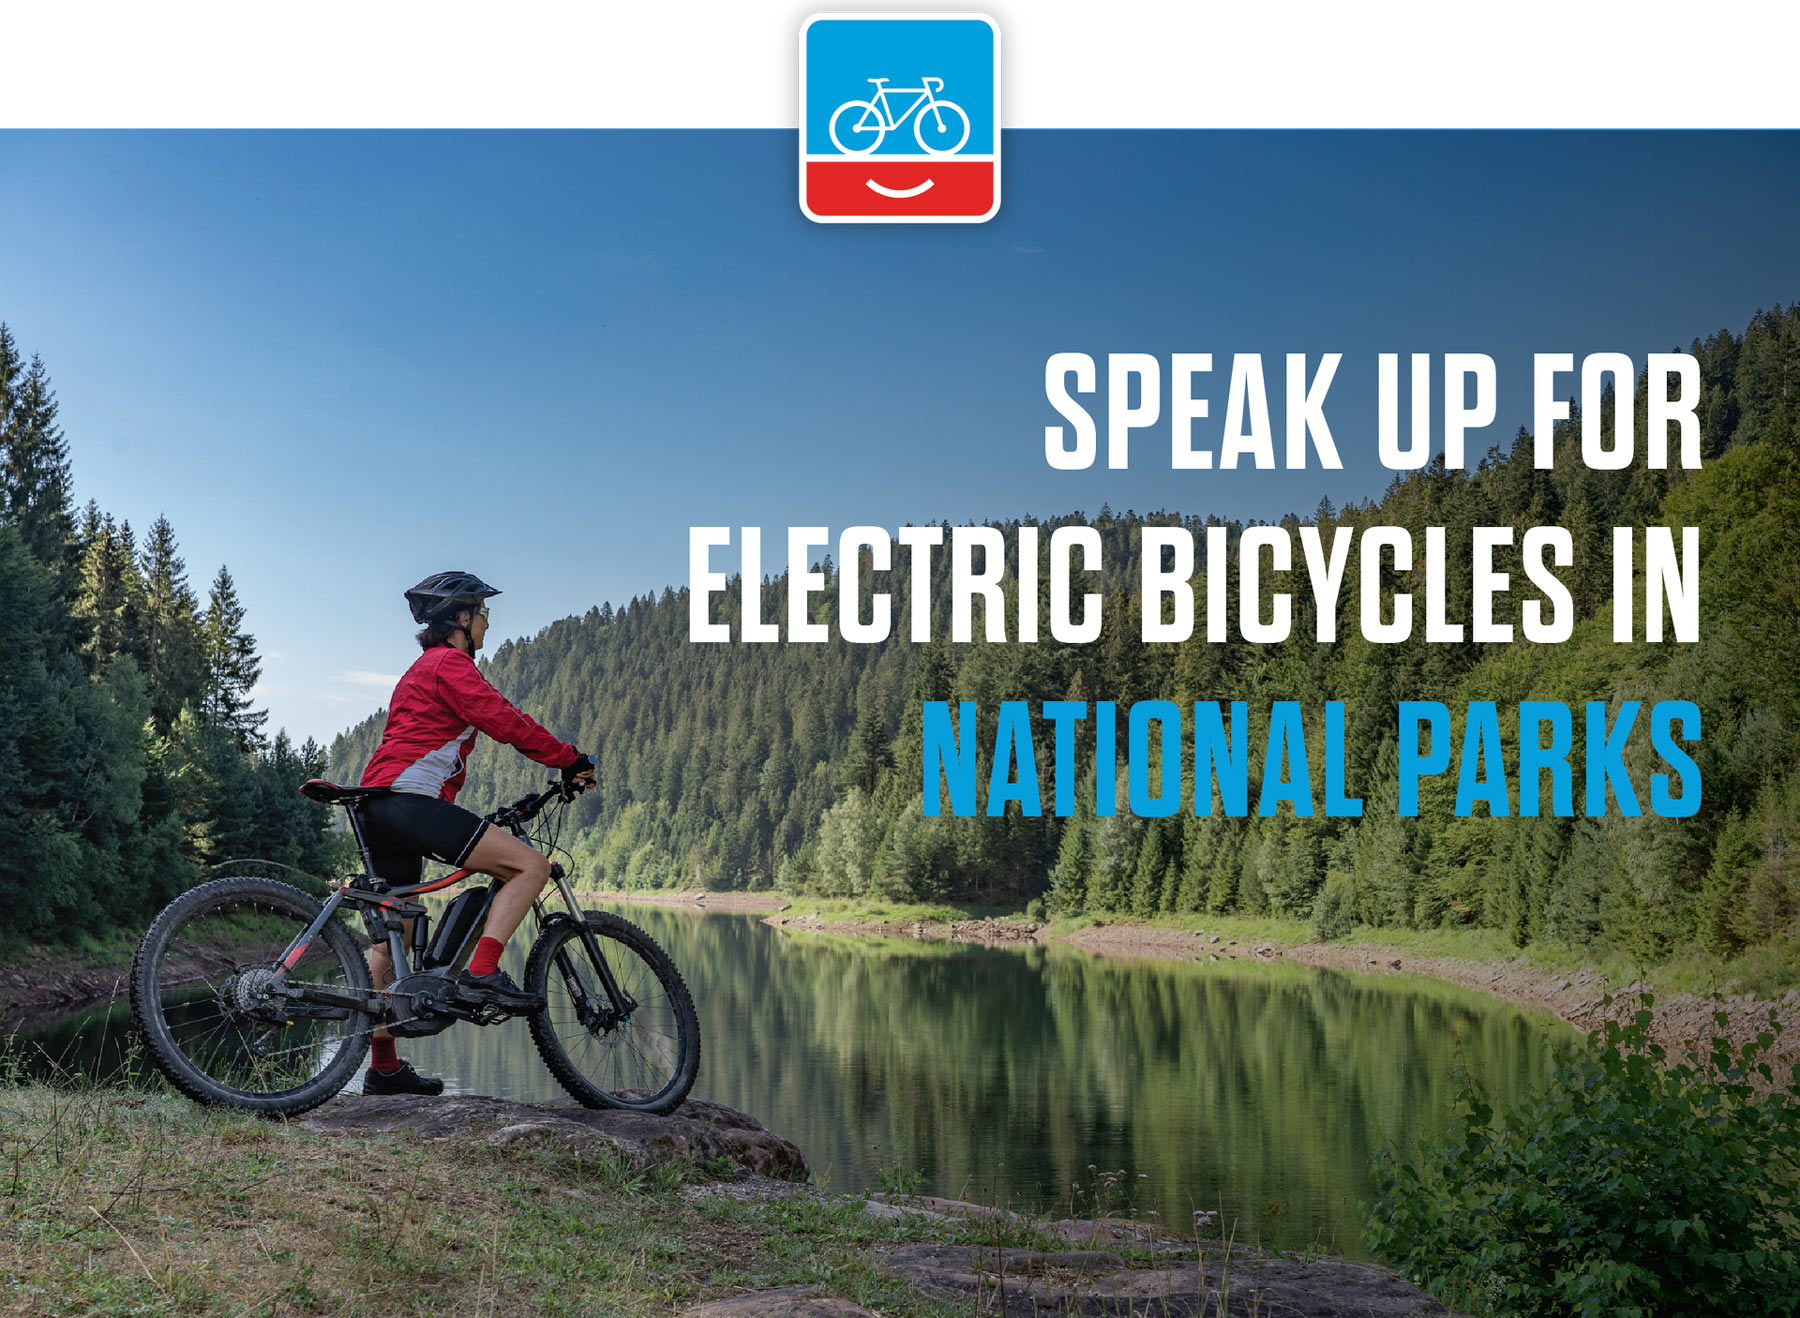 people for bikes graphic about national park service comment period for allowing e-bike use